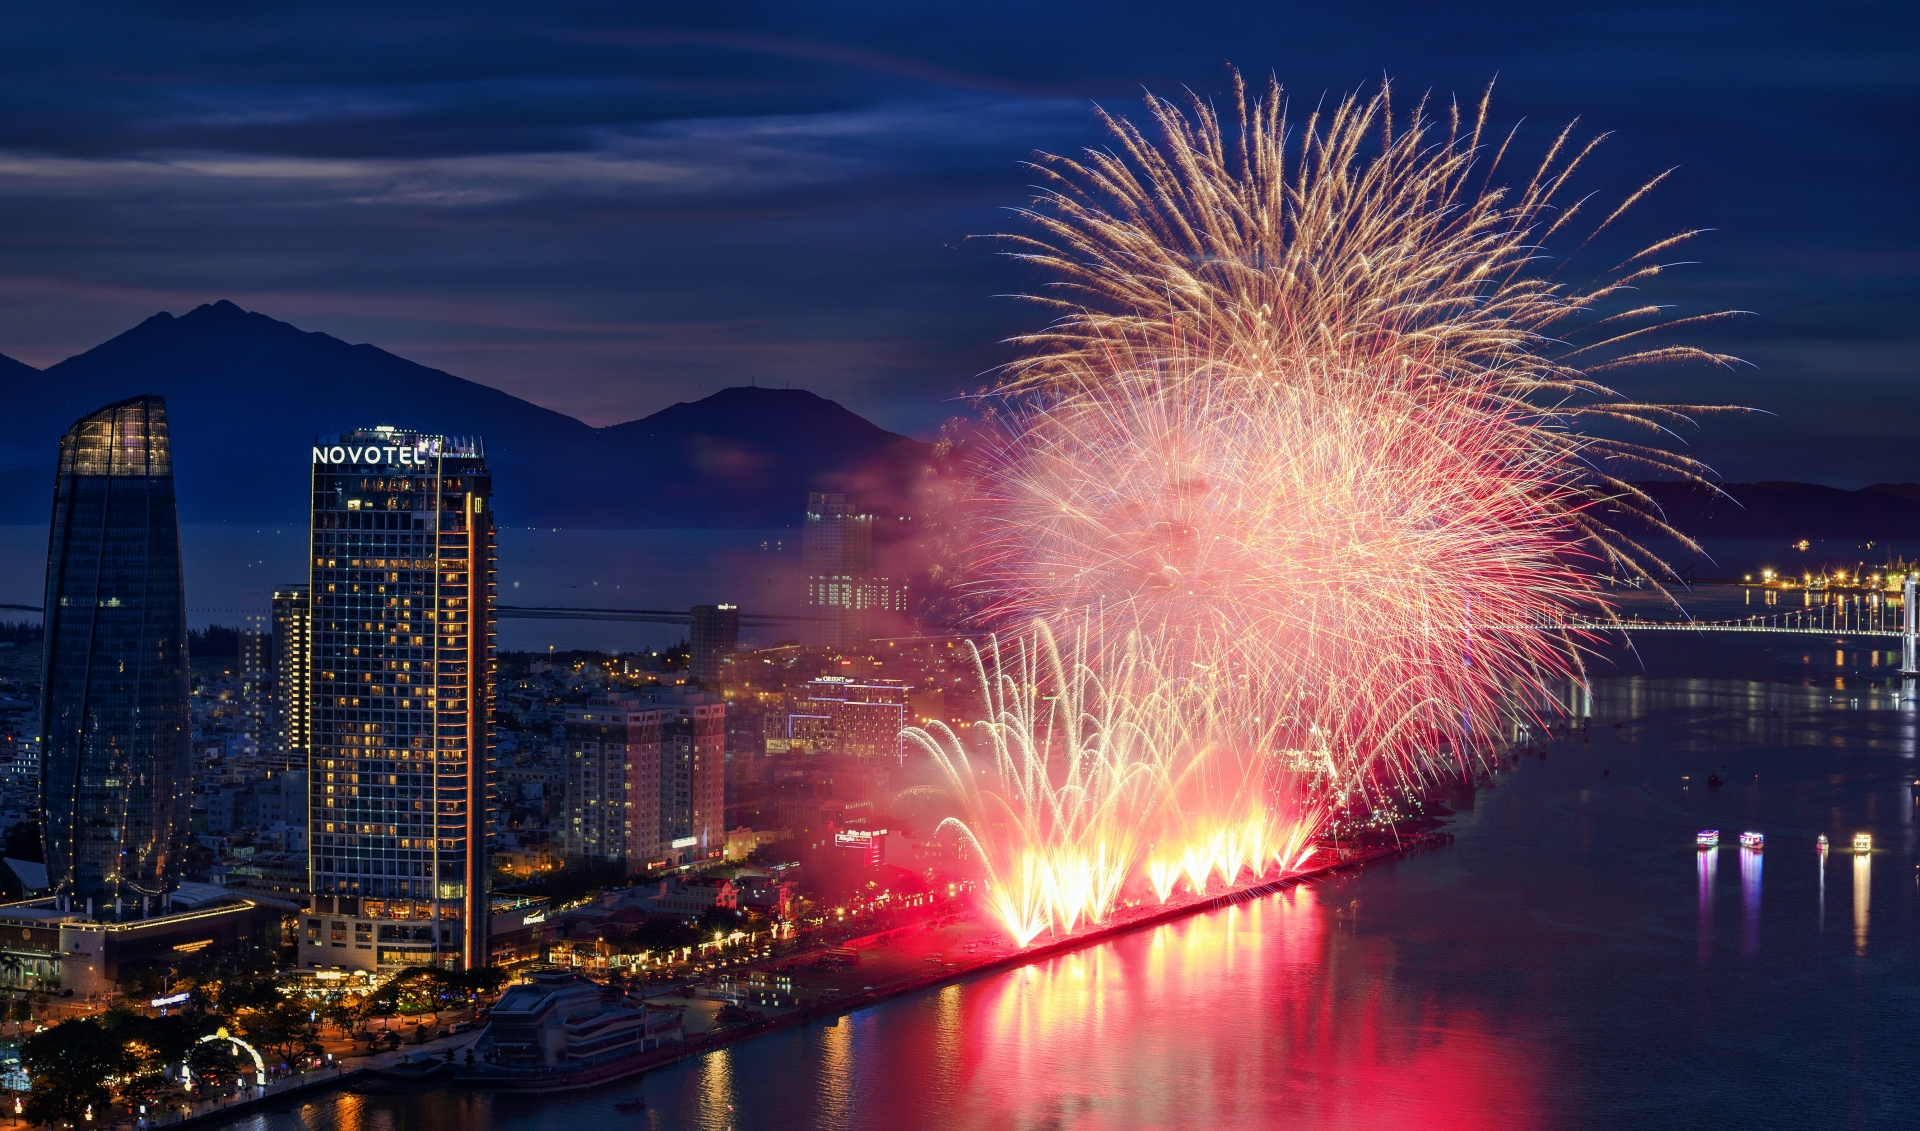 Novotel Danang - the best place in town to enjoy fireworks festival